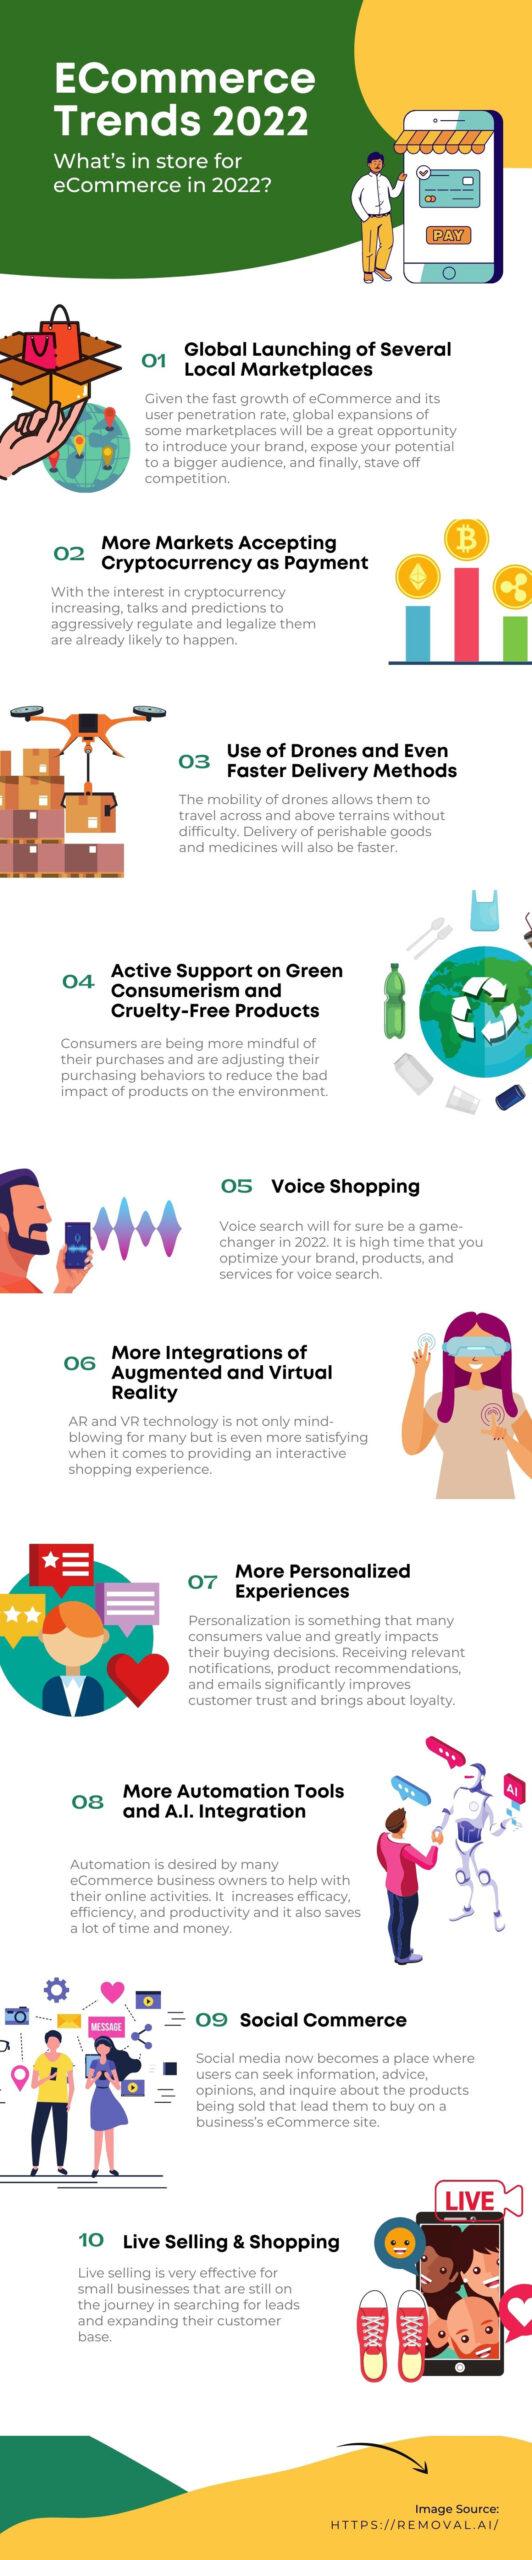 Ecommerce Trends 2022 - Infographic